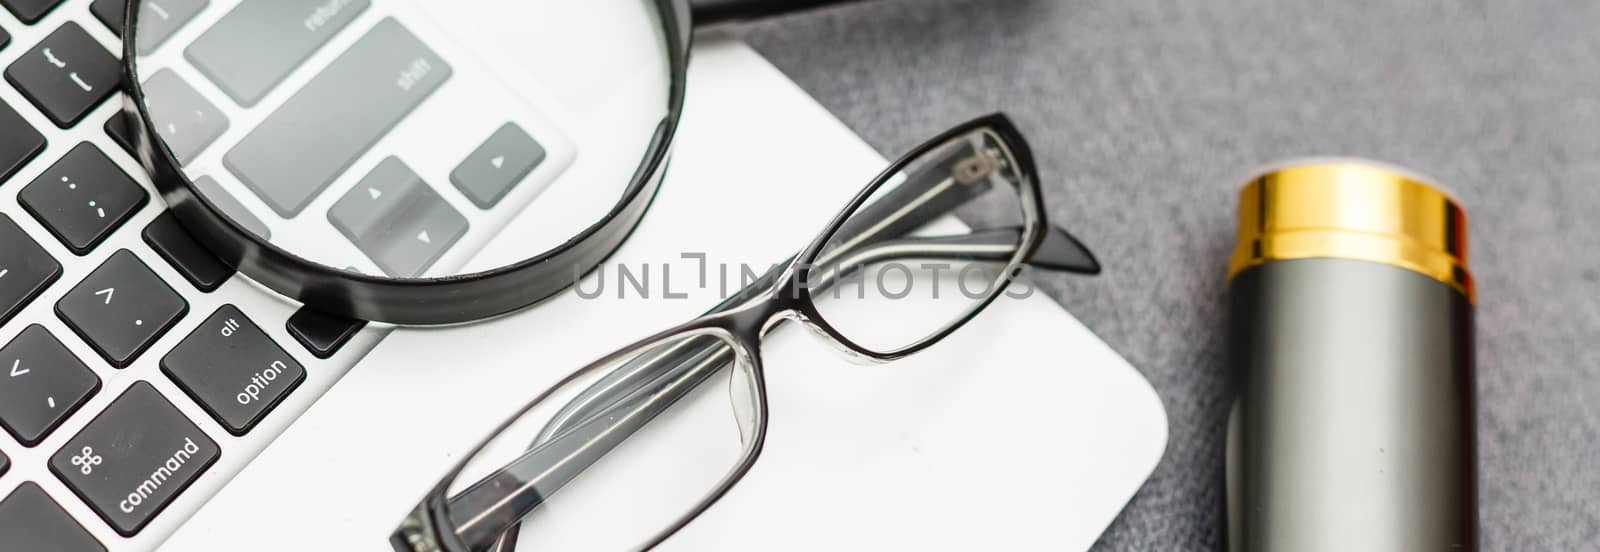 Business summary reports and a magnifying glass with glasses on table office. Concept of Data Analysis, Investment Planning, Business Analytics.